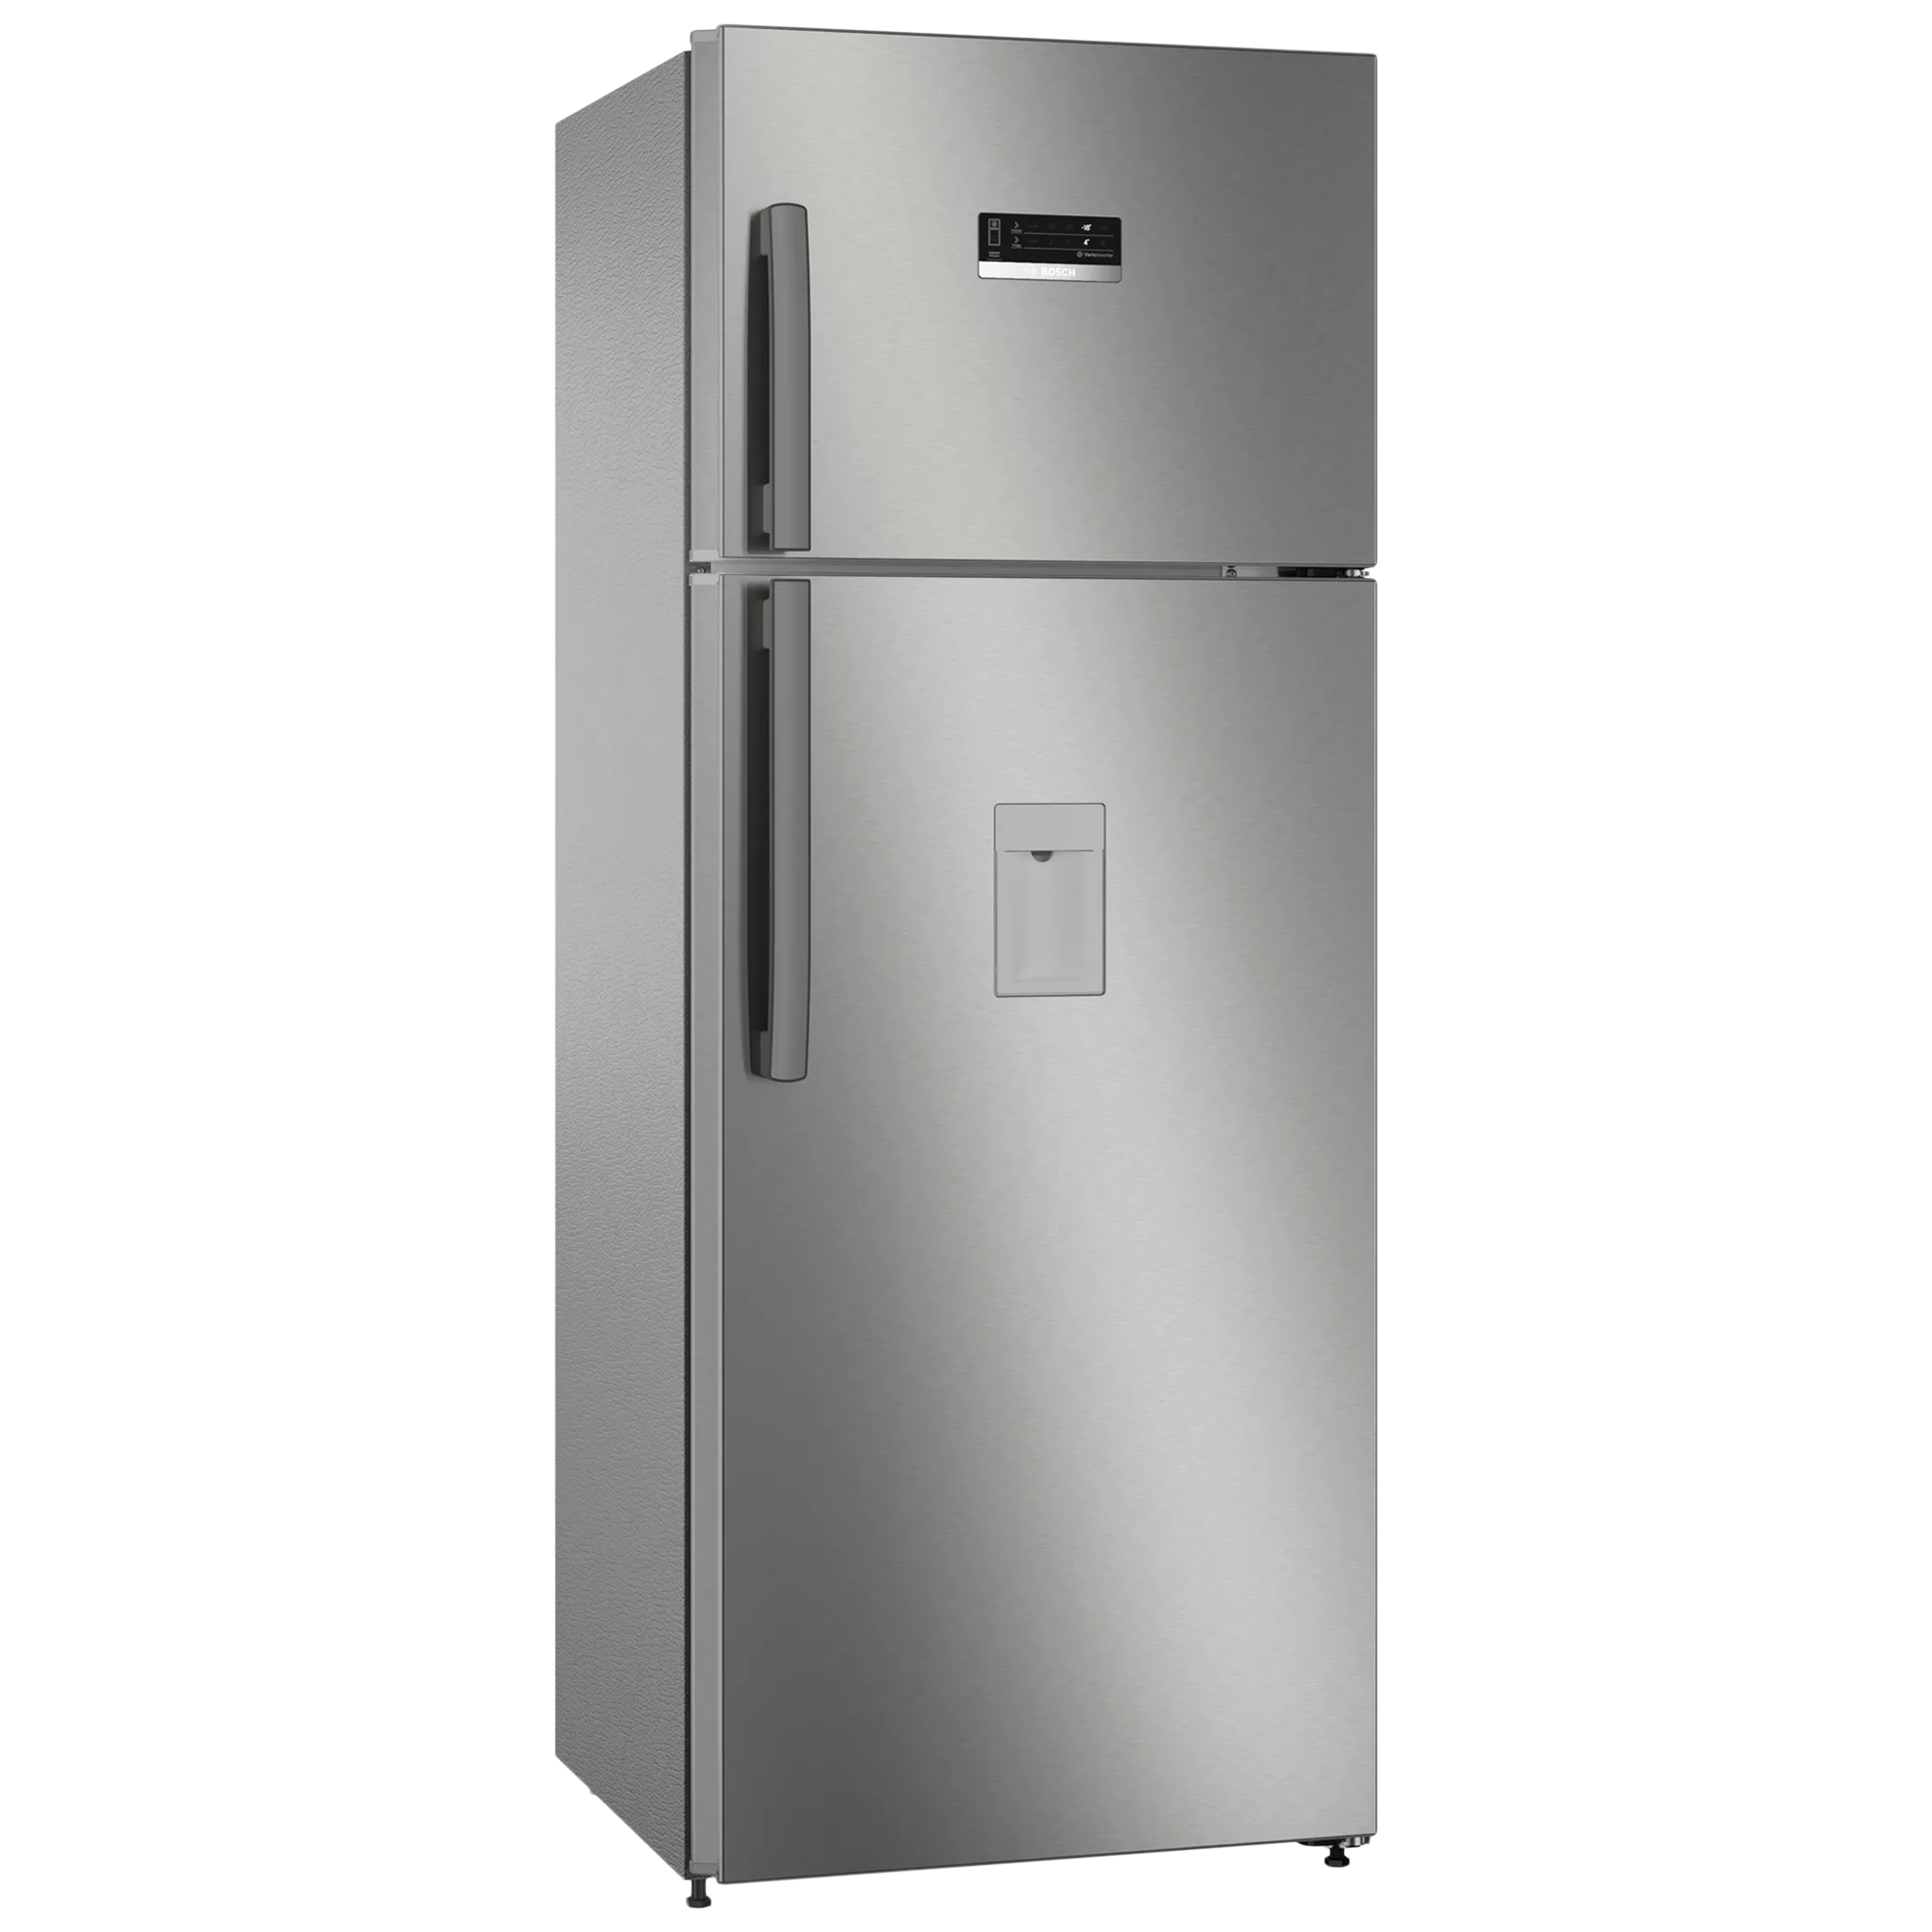 Bosch Series 4 334 Litres 3 Star Frost Free Double Door Convertible Refrigerator with Temperature Display (CTC35S031I, Sparkly Steel)_1